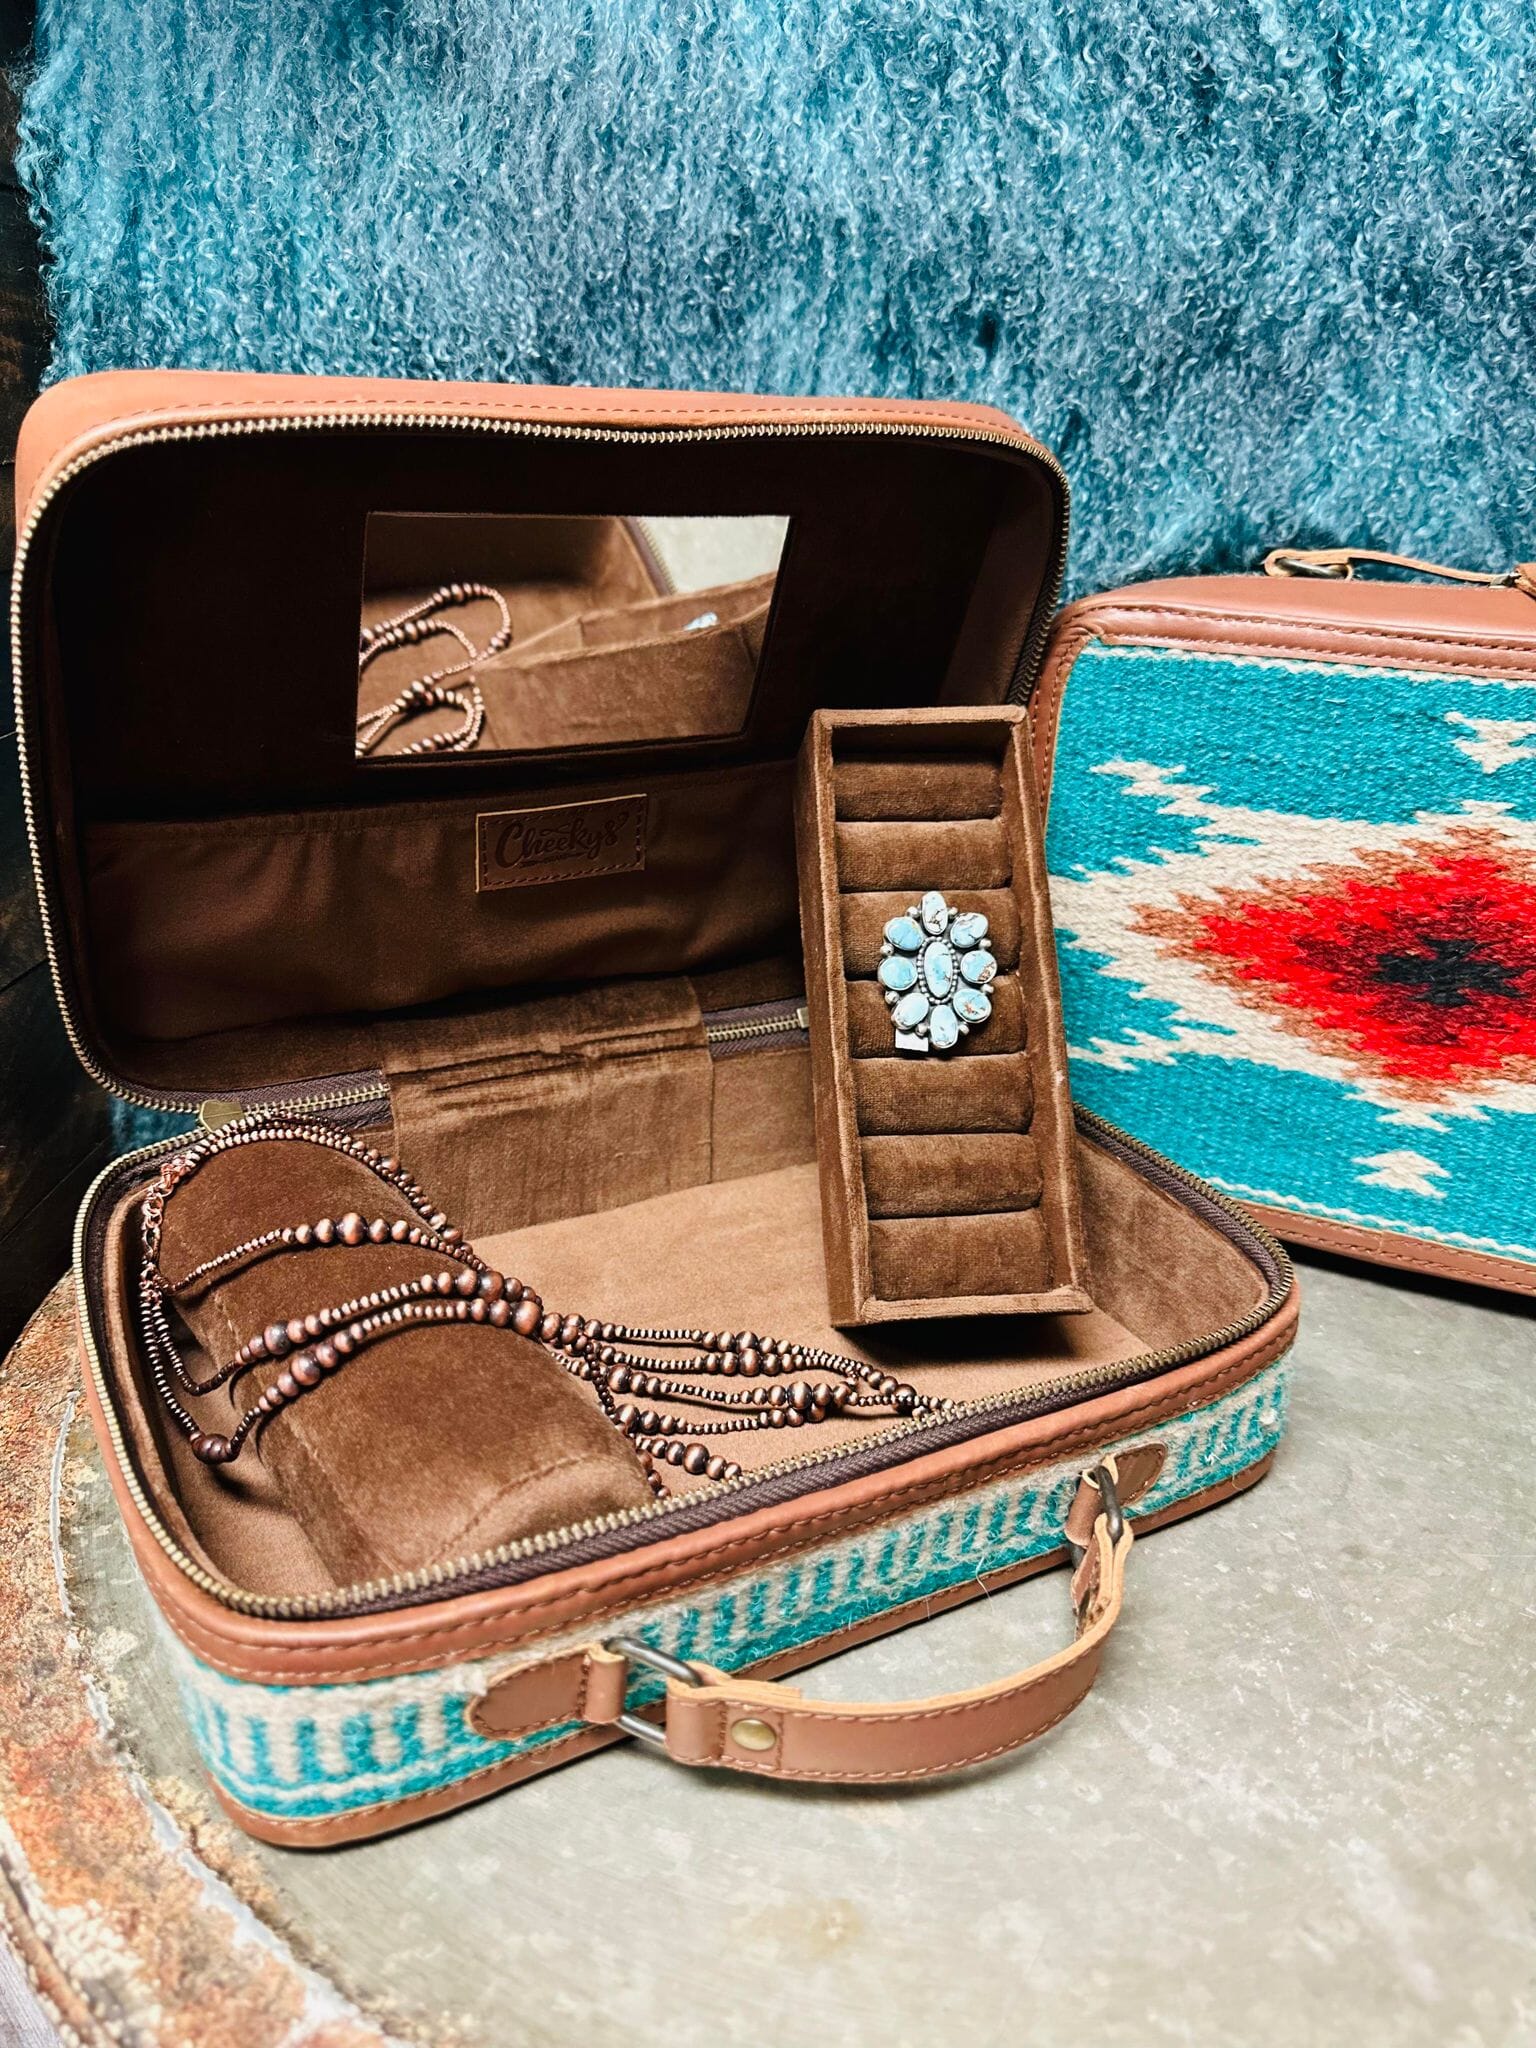 Grissom Saddle Blanket Square Jewelry Case Cheekys Brand 